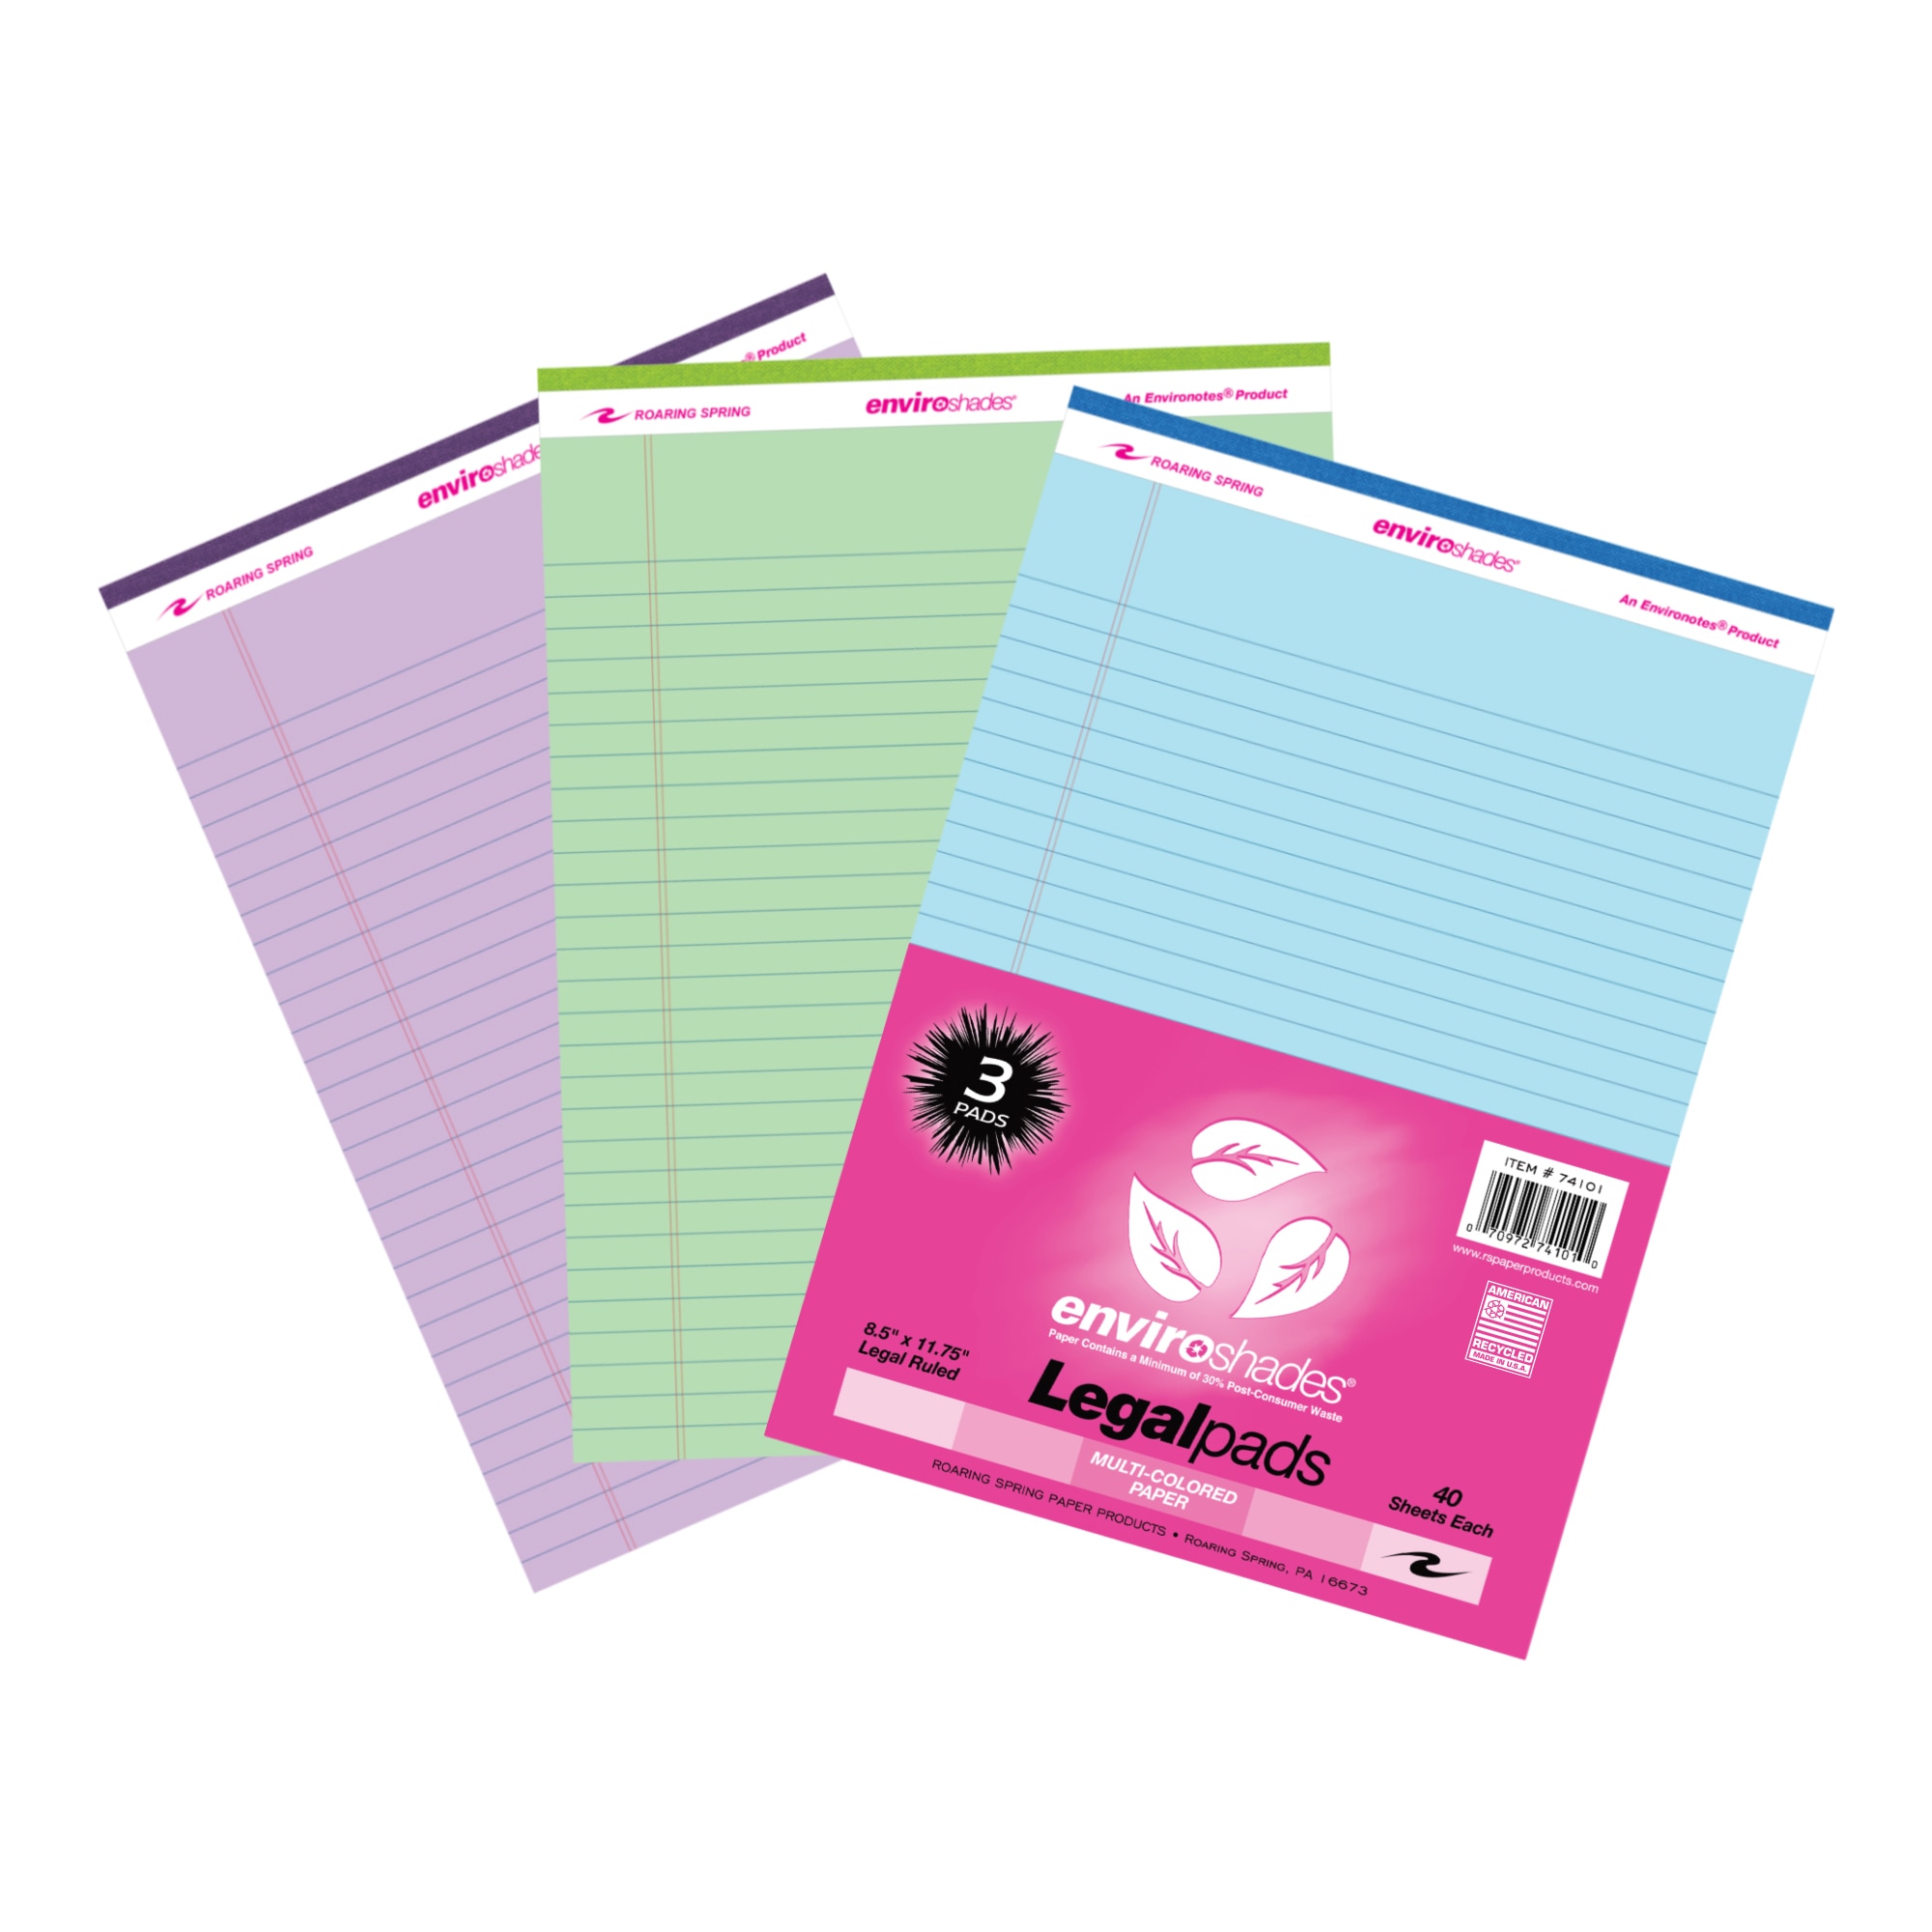 Roaring Spring Enviroshades Recycled Colored Legal Pads, Pack of 3, 8.5" x 11.75", 40 Sheets Per Pad, Assorted Colors (Blue, Orchid, Green)